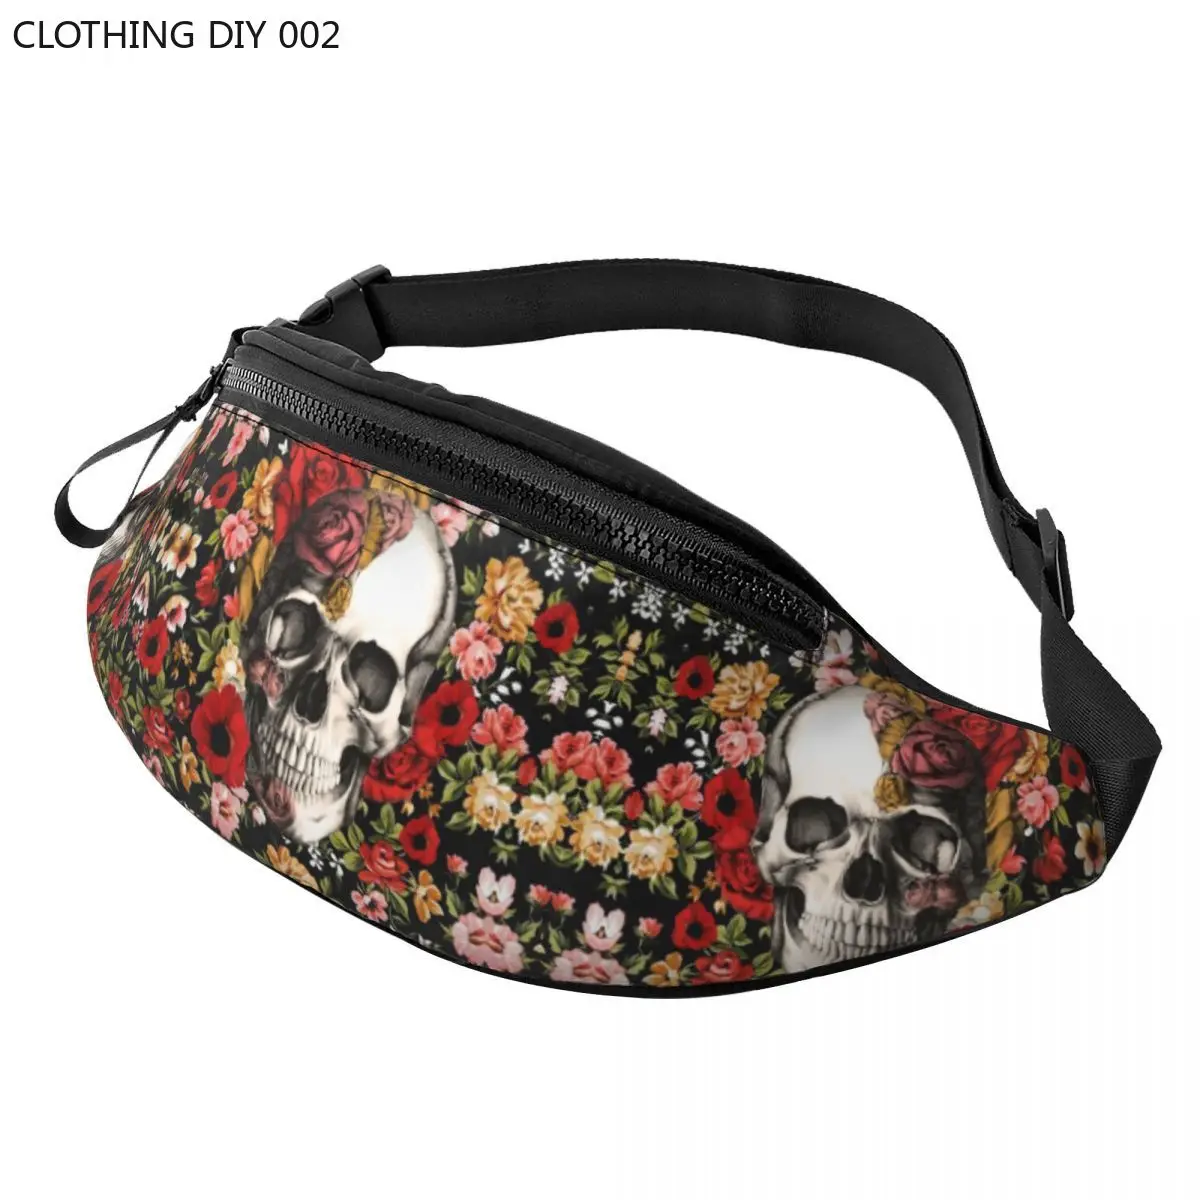 

Bloom Floral Skull With Roses Fanny Bag Customized Sugar Skull Crossbody Waist Pack Men Women Traveling Phone Money Pouch